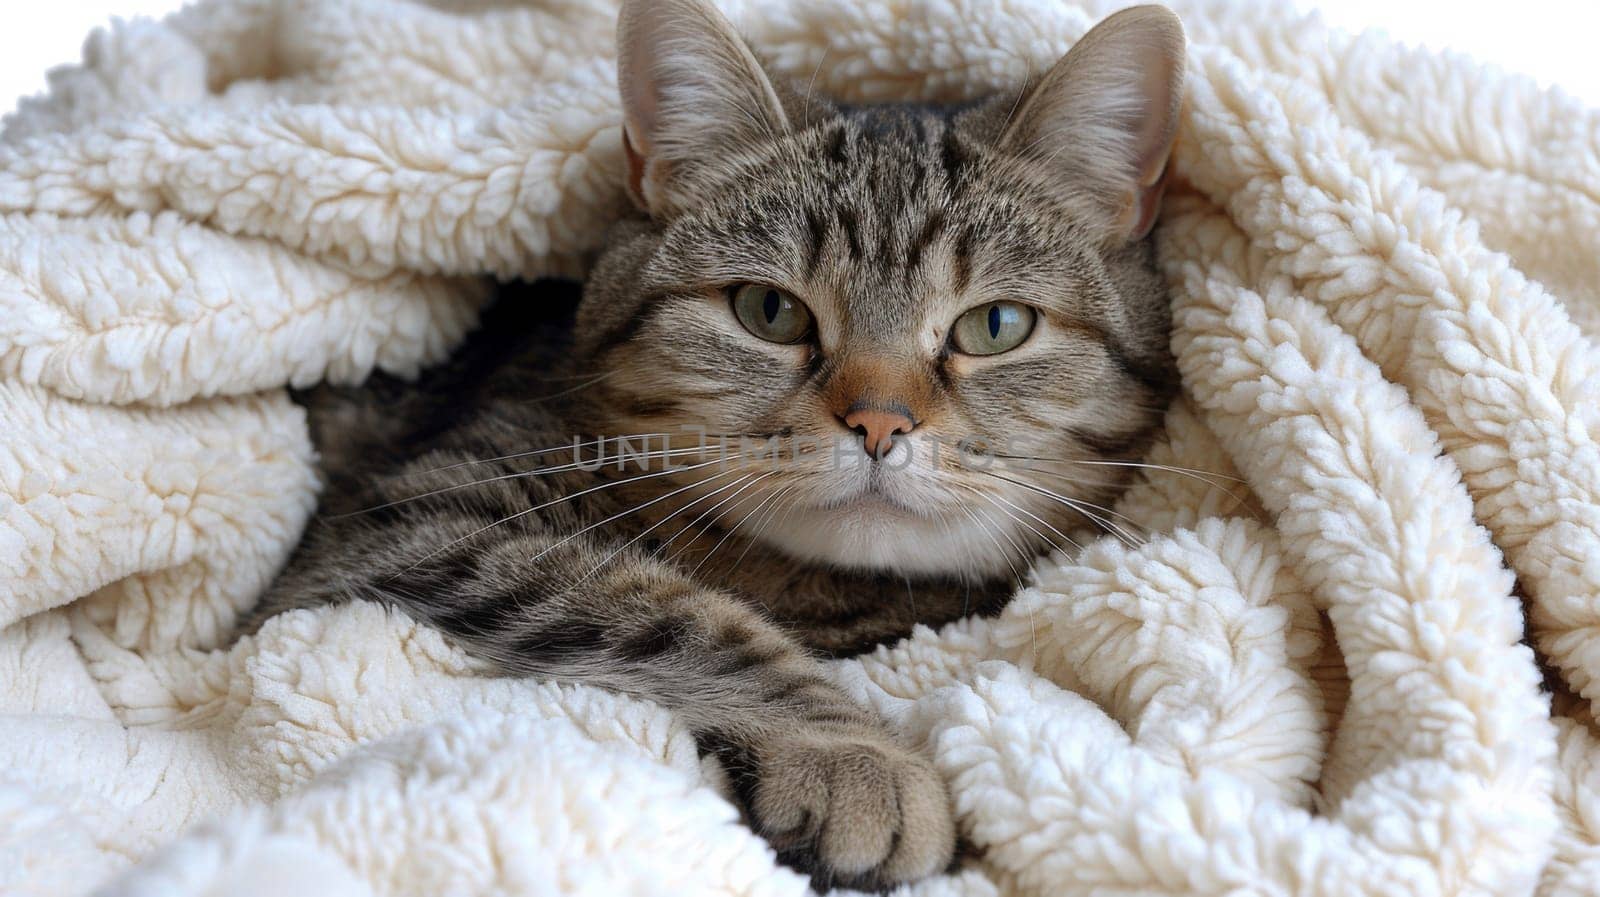 A cat laying on a blanket with its eyes closed